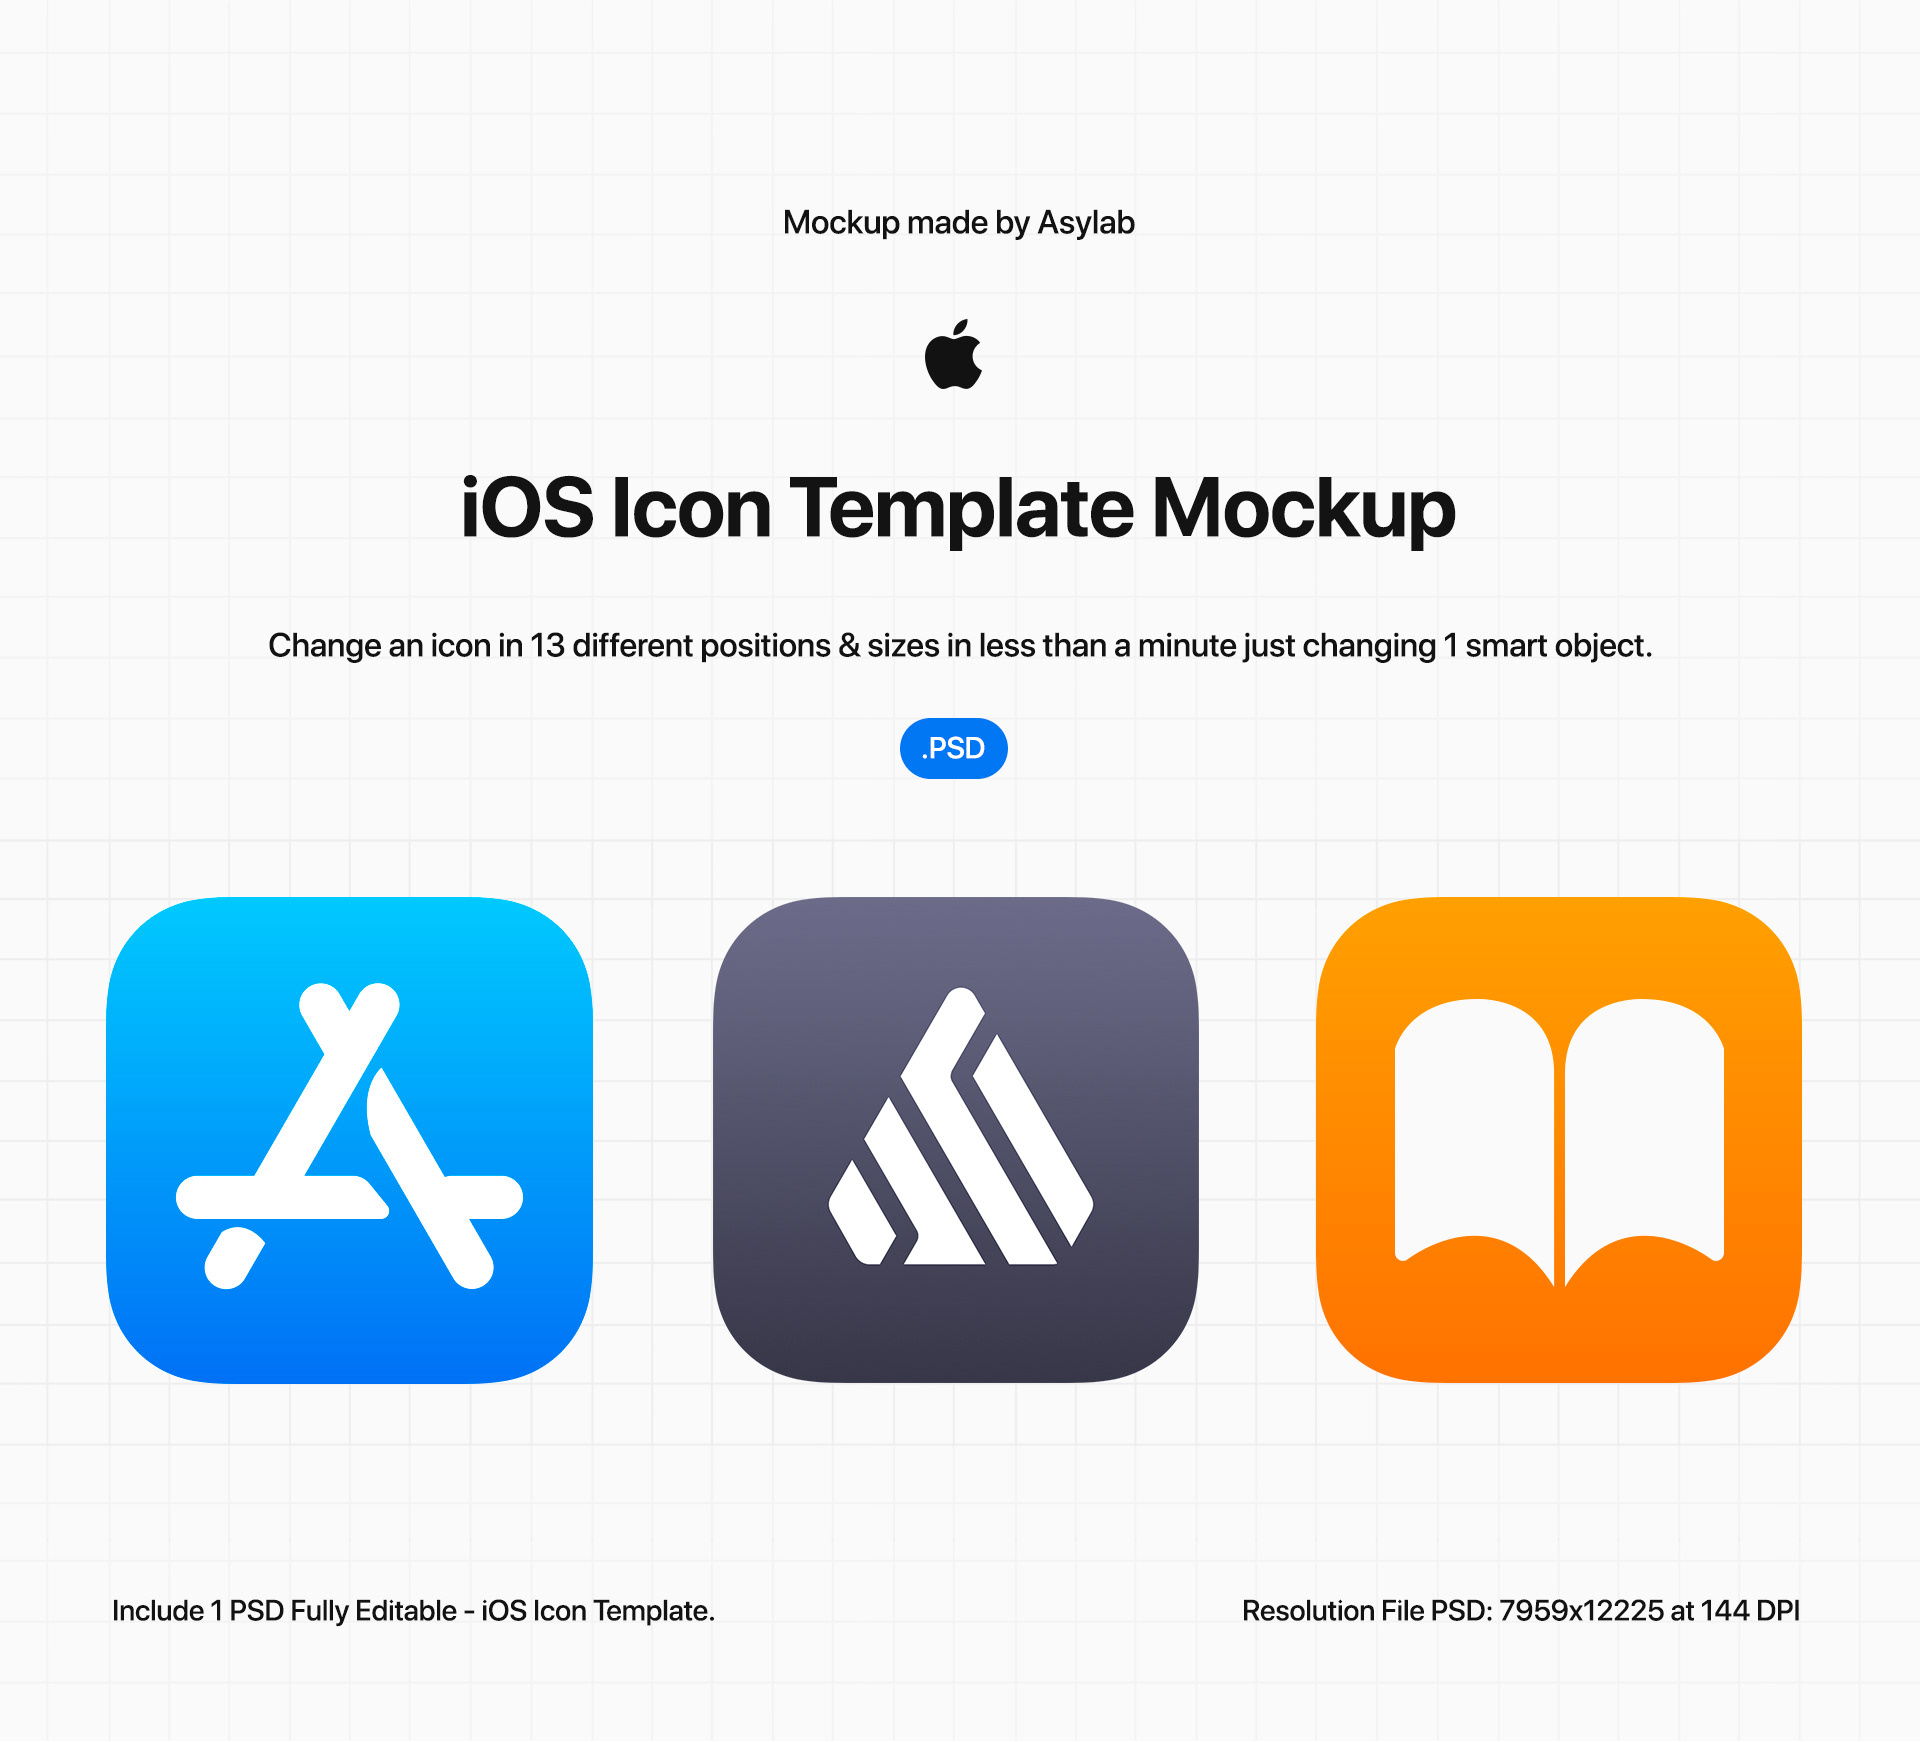 Download App Icon Mockup at Vectorified.com | Collection of App Icon Mockup free for personal use